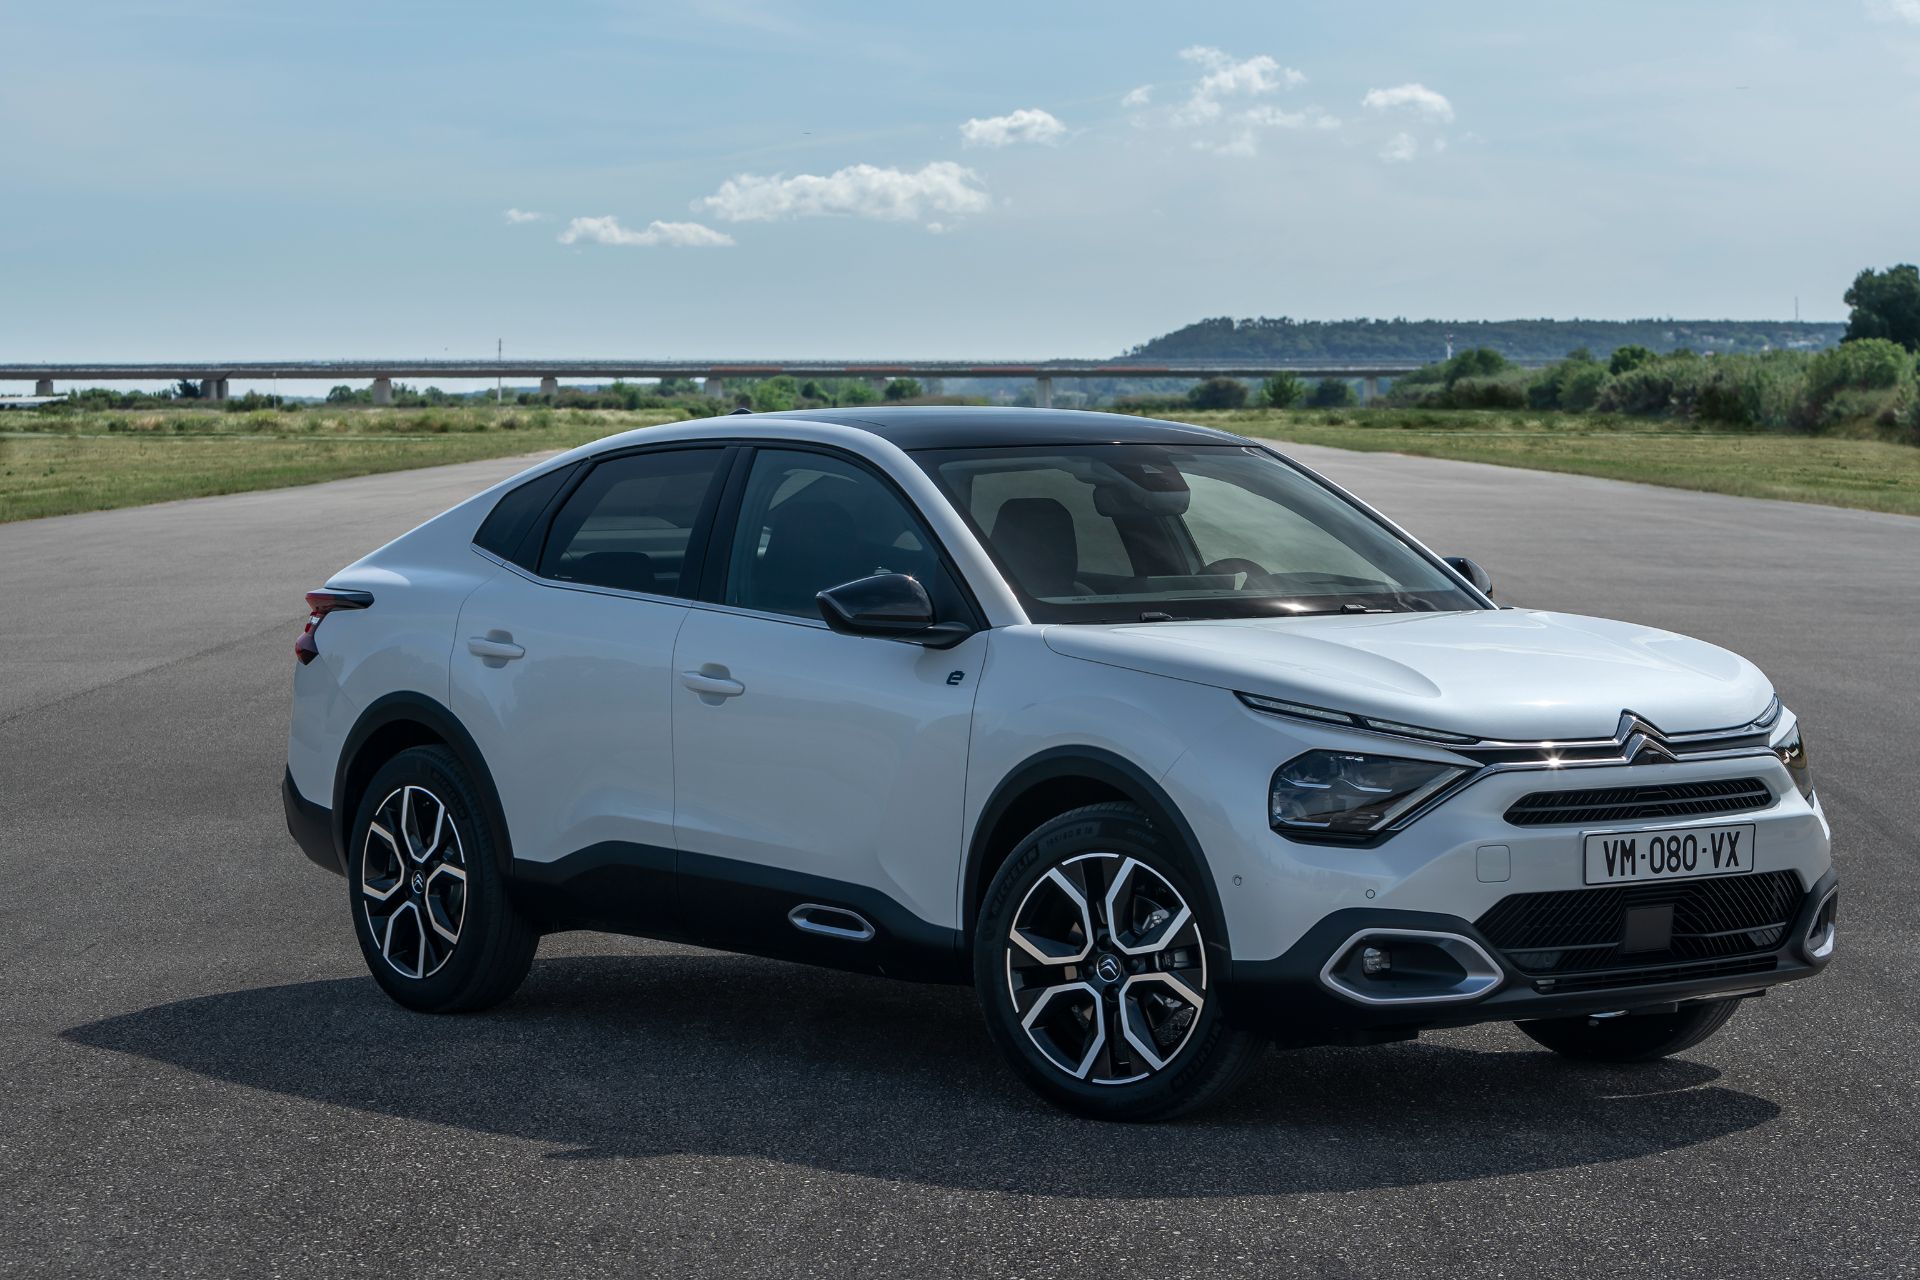 2021 Citroen C4 Debuts New Look, Will Offer All-Electric Model